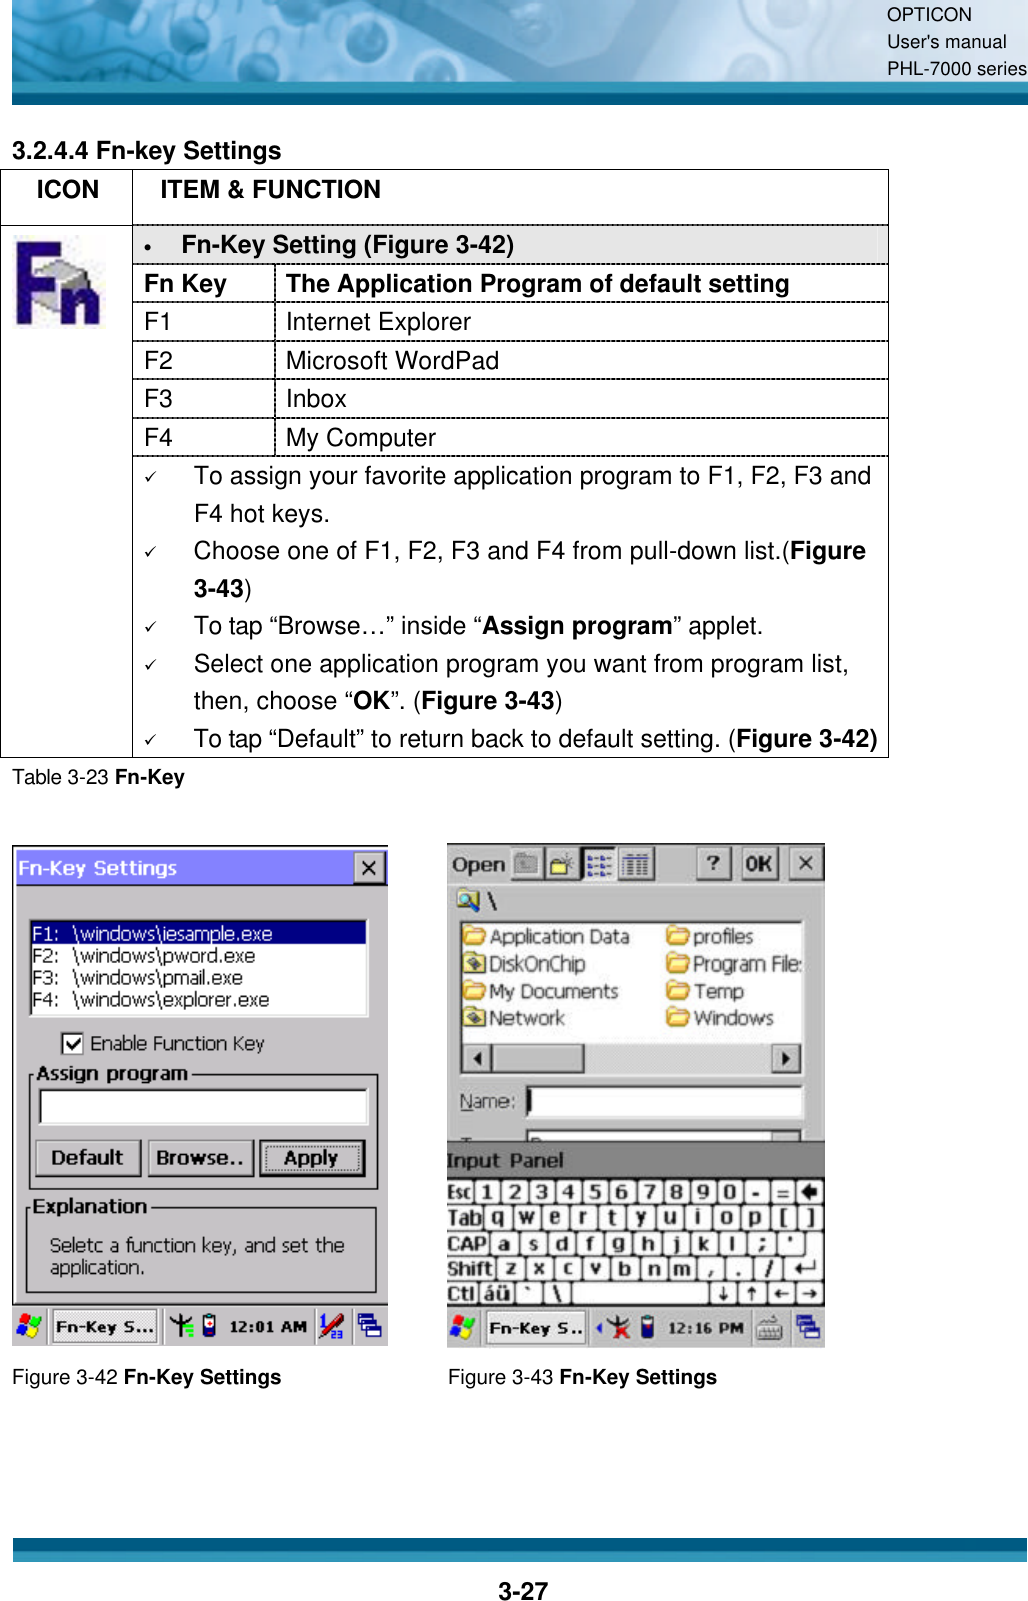 OPTICON User&apos;s manual PHL-7000 series    3-27 3.2.4.4 Fn-key Settings   ICON  ITEM &amp; FUNCTION • Fn-Key Setting (Figure 3-42) Fn Key The Application Program of default setting F1 Internet Explorer F2 Microsoft WordPad F3 Inbox F4 My Computer  ü To assign your favorite application program to F1, F2, F3 and F4 hot keys. ü Choose one of F1, F2, F3 and F4 from pull-down list.(Figure 3-43) ü To tap “Browse…” inside “Assign program” applet. ü Select one application program you want from program list, then, choose “OK”. (Figure 3-43) ü To tap “Default” to return back to default setting. (Figure 3-42) Table 3-23 Fn-Key    Figure 3-42 Fn-Key Settings Figure 3-43 Fn-Key Settings   